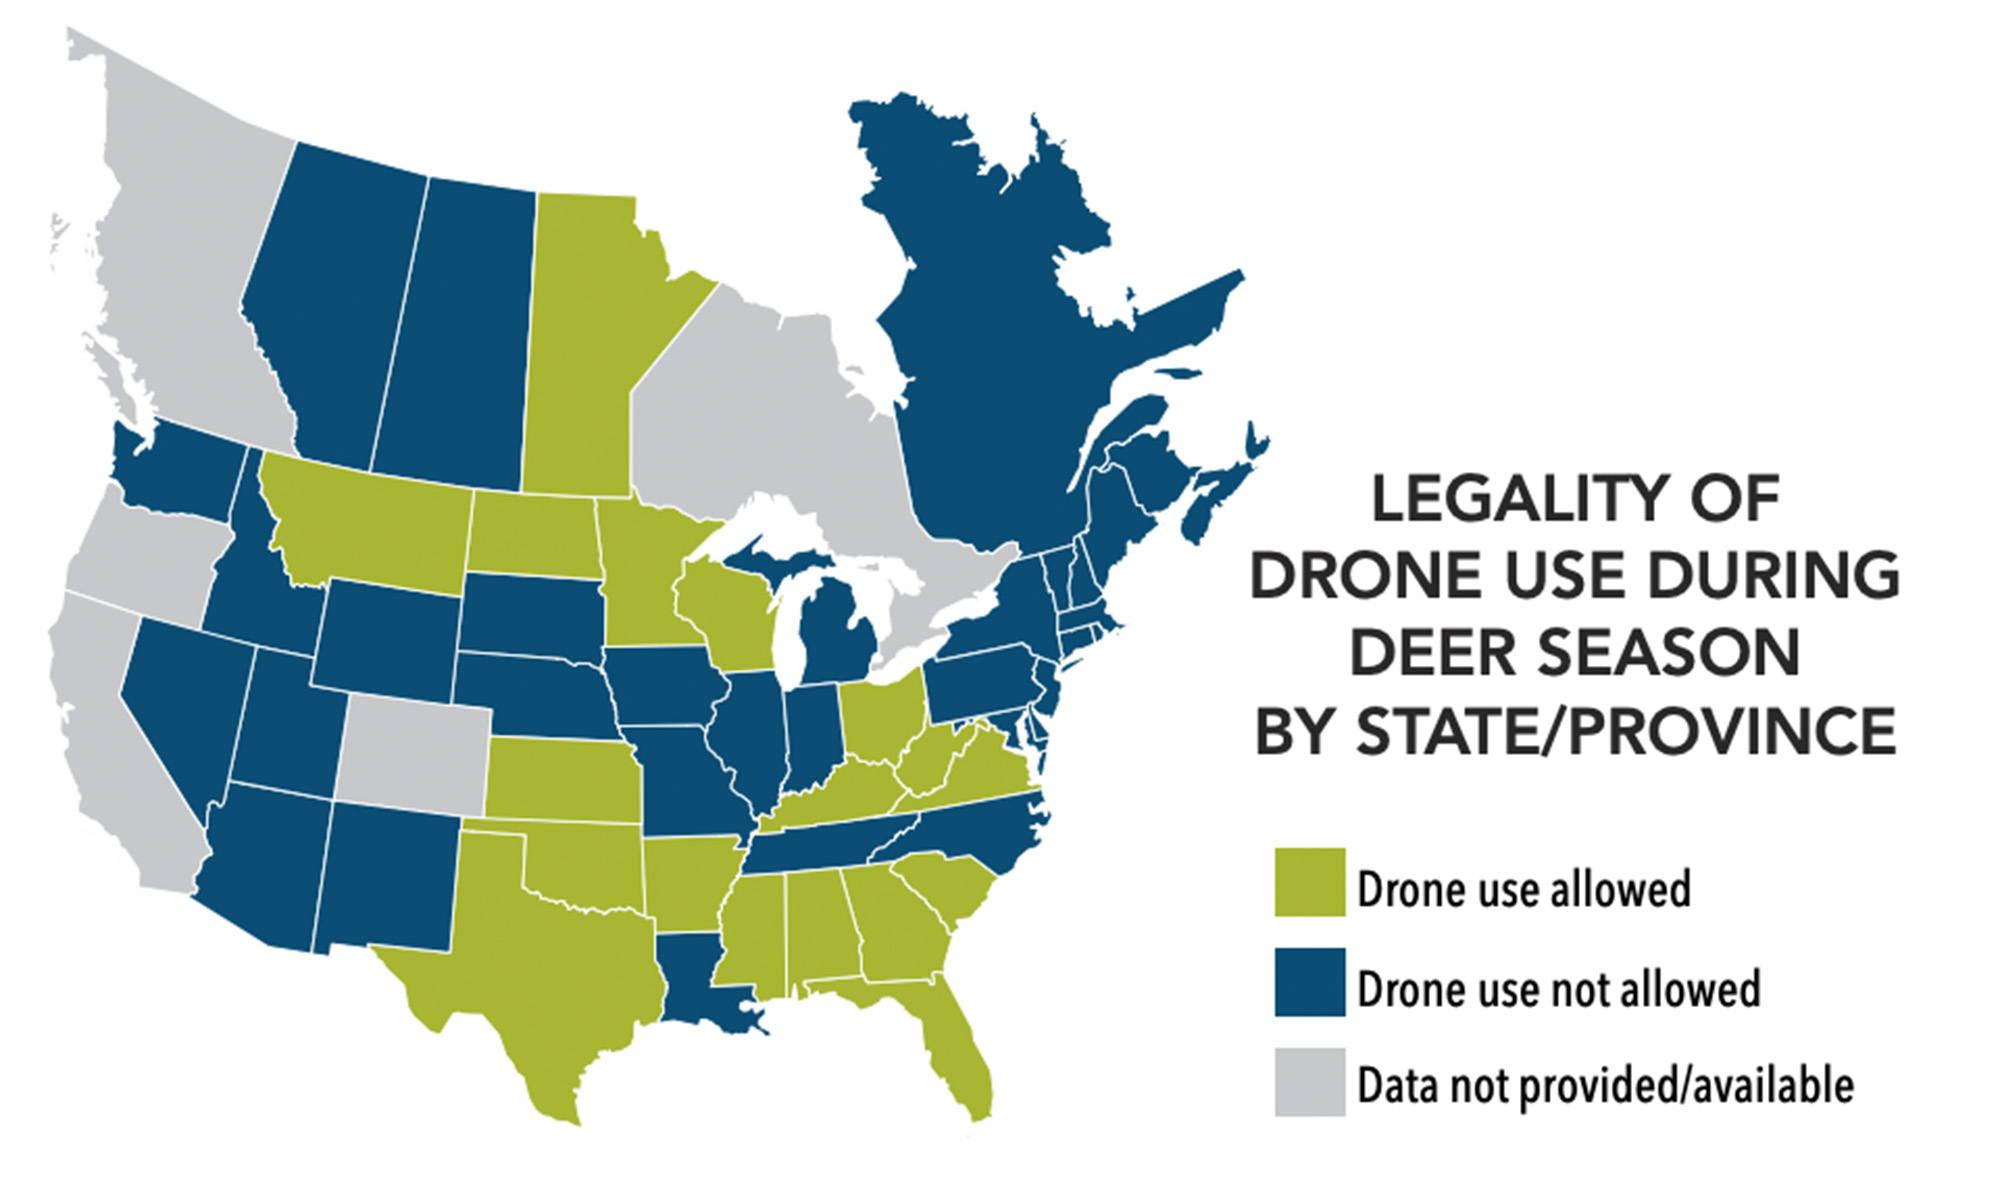 A map showing where drones are legal in hunting.